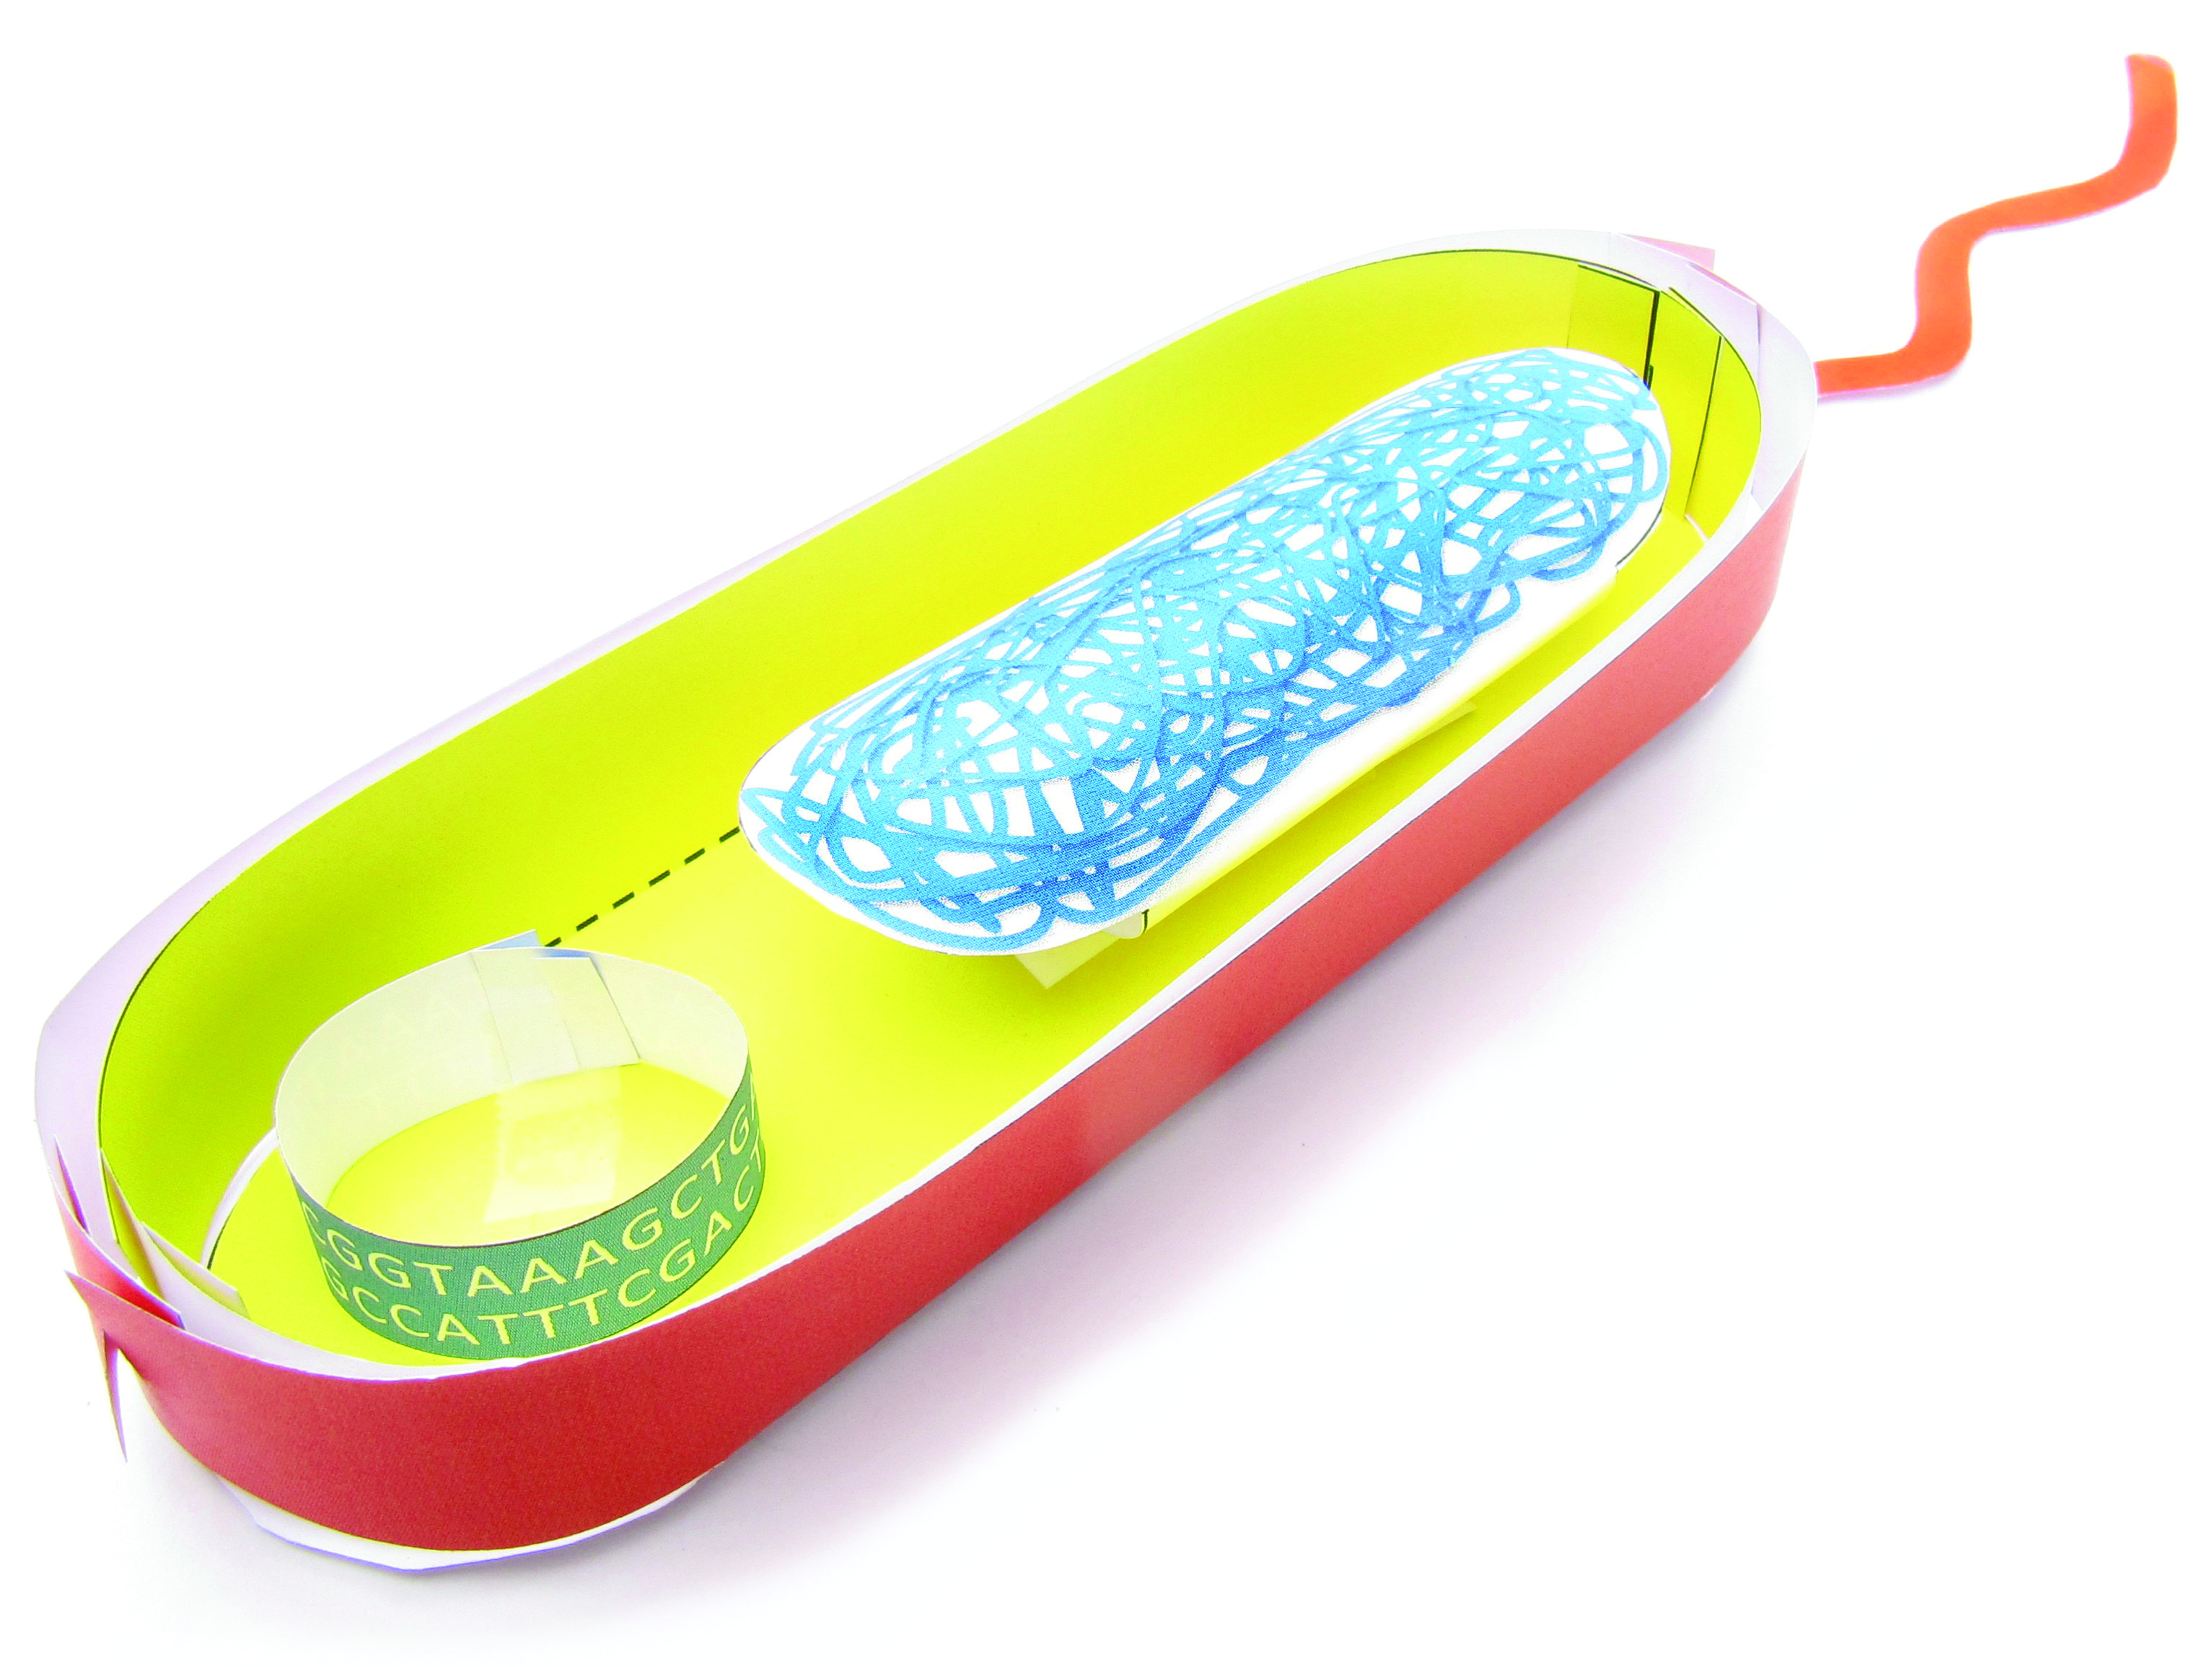 Concepts NGSS Includes Teacher Guide NewPath Learning Simple Plant Cell 3-D Model Kit: 10 Easy-to-Assemble Paper Models to Explore Next Generation Science Ideal for Classroom or Home Study